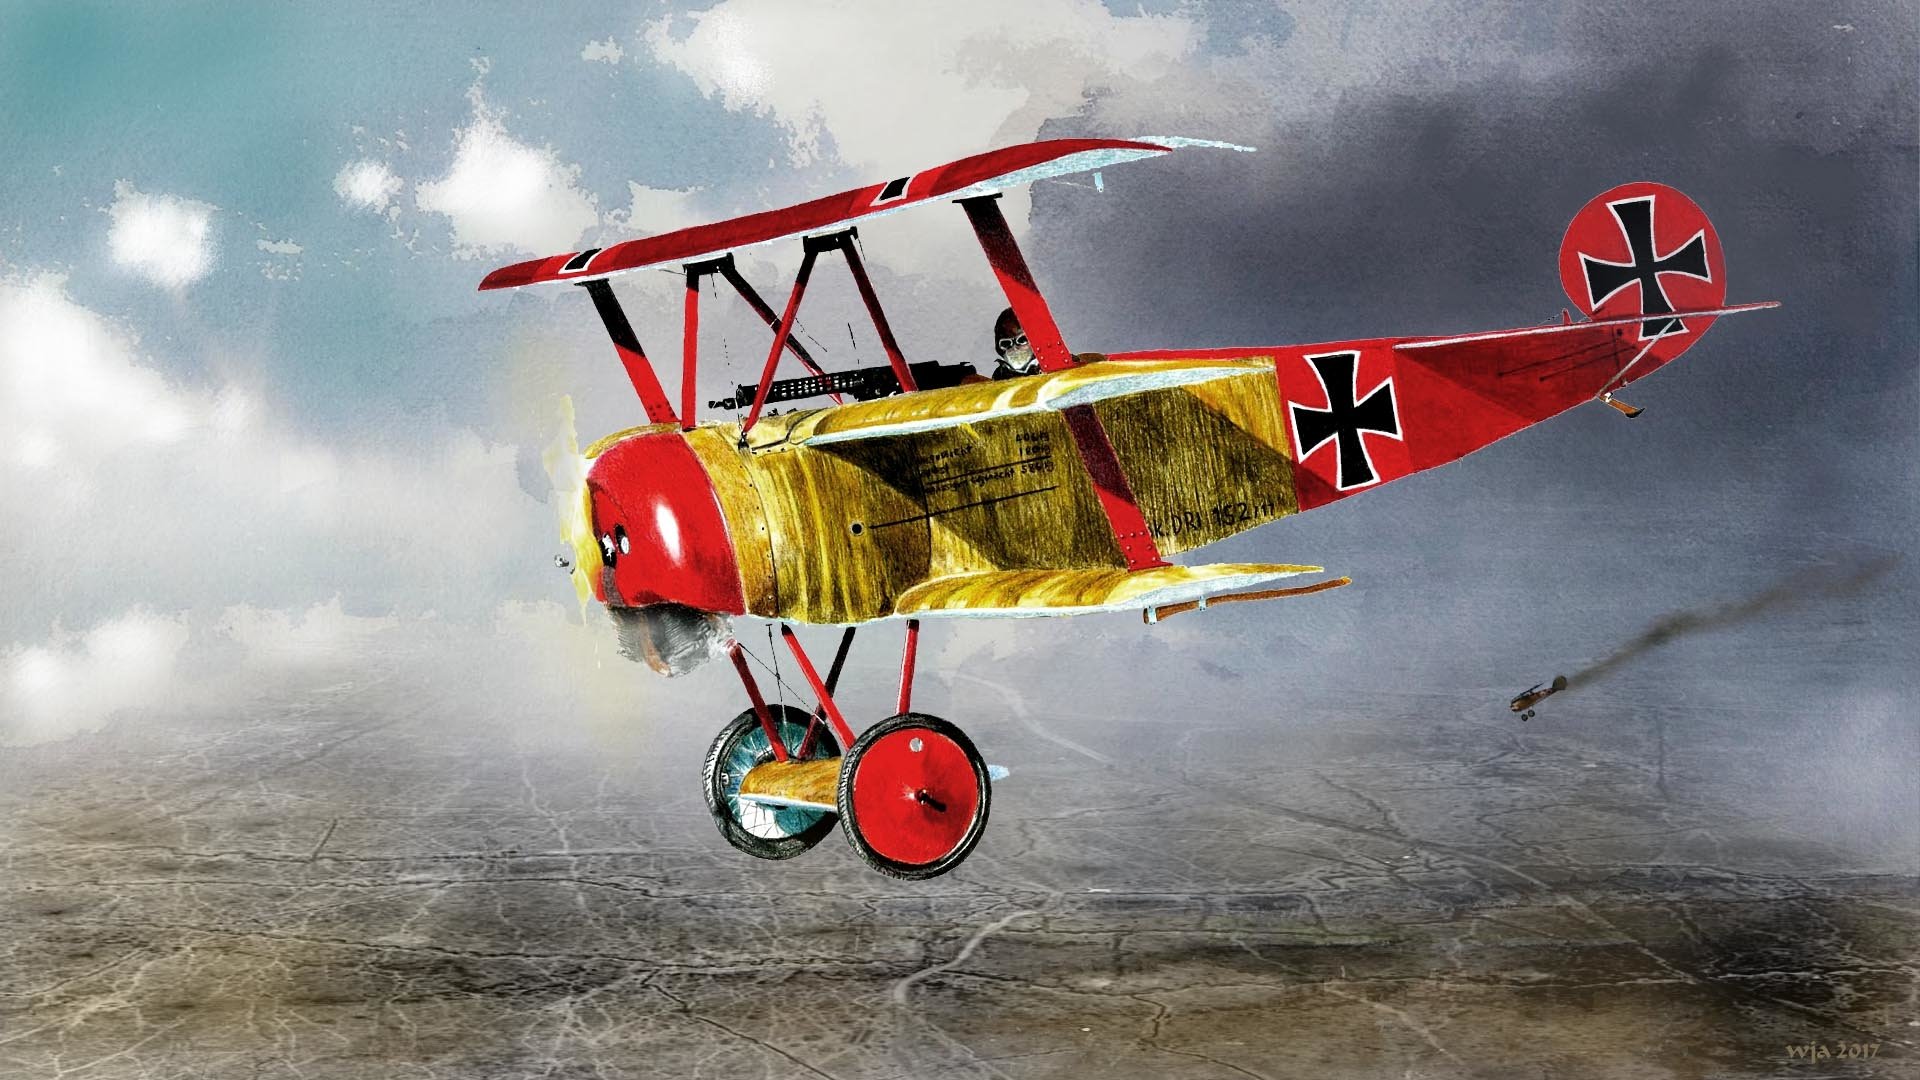 The Red Baron Homeward Bound HD Wallpaper Background Image